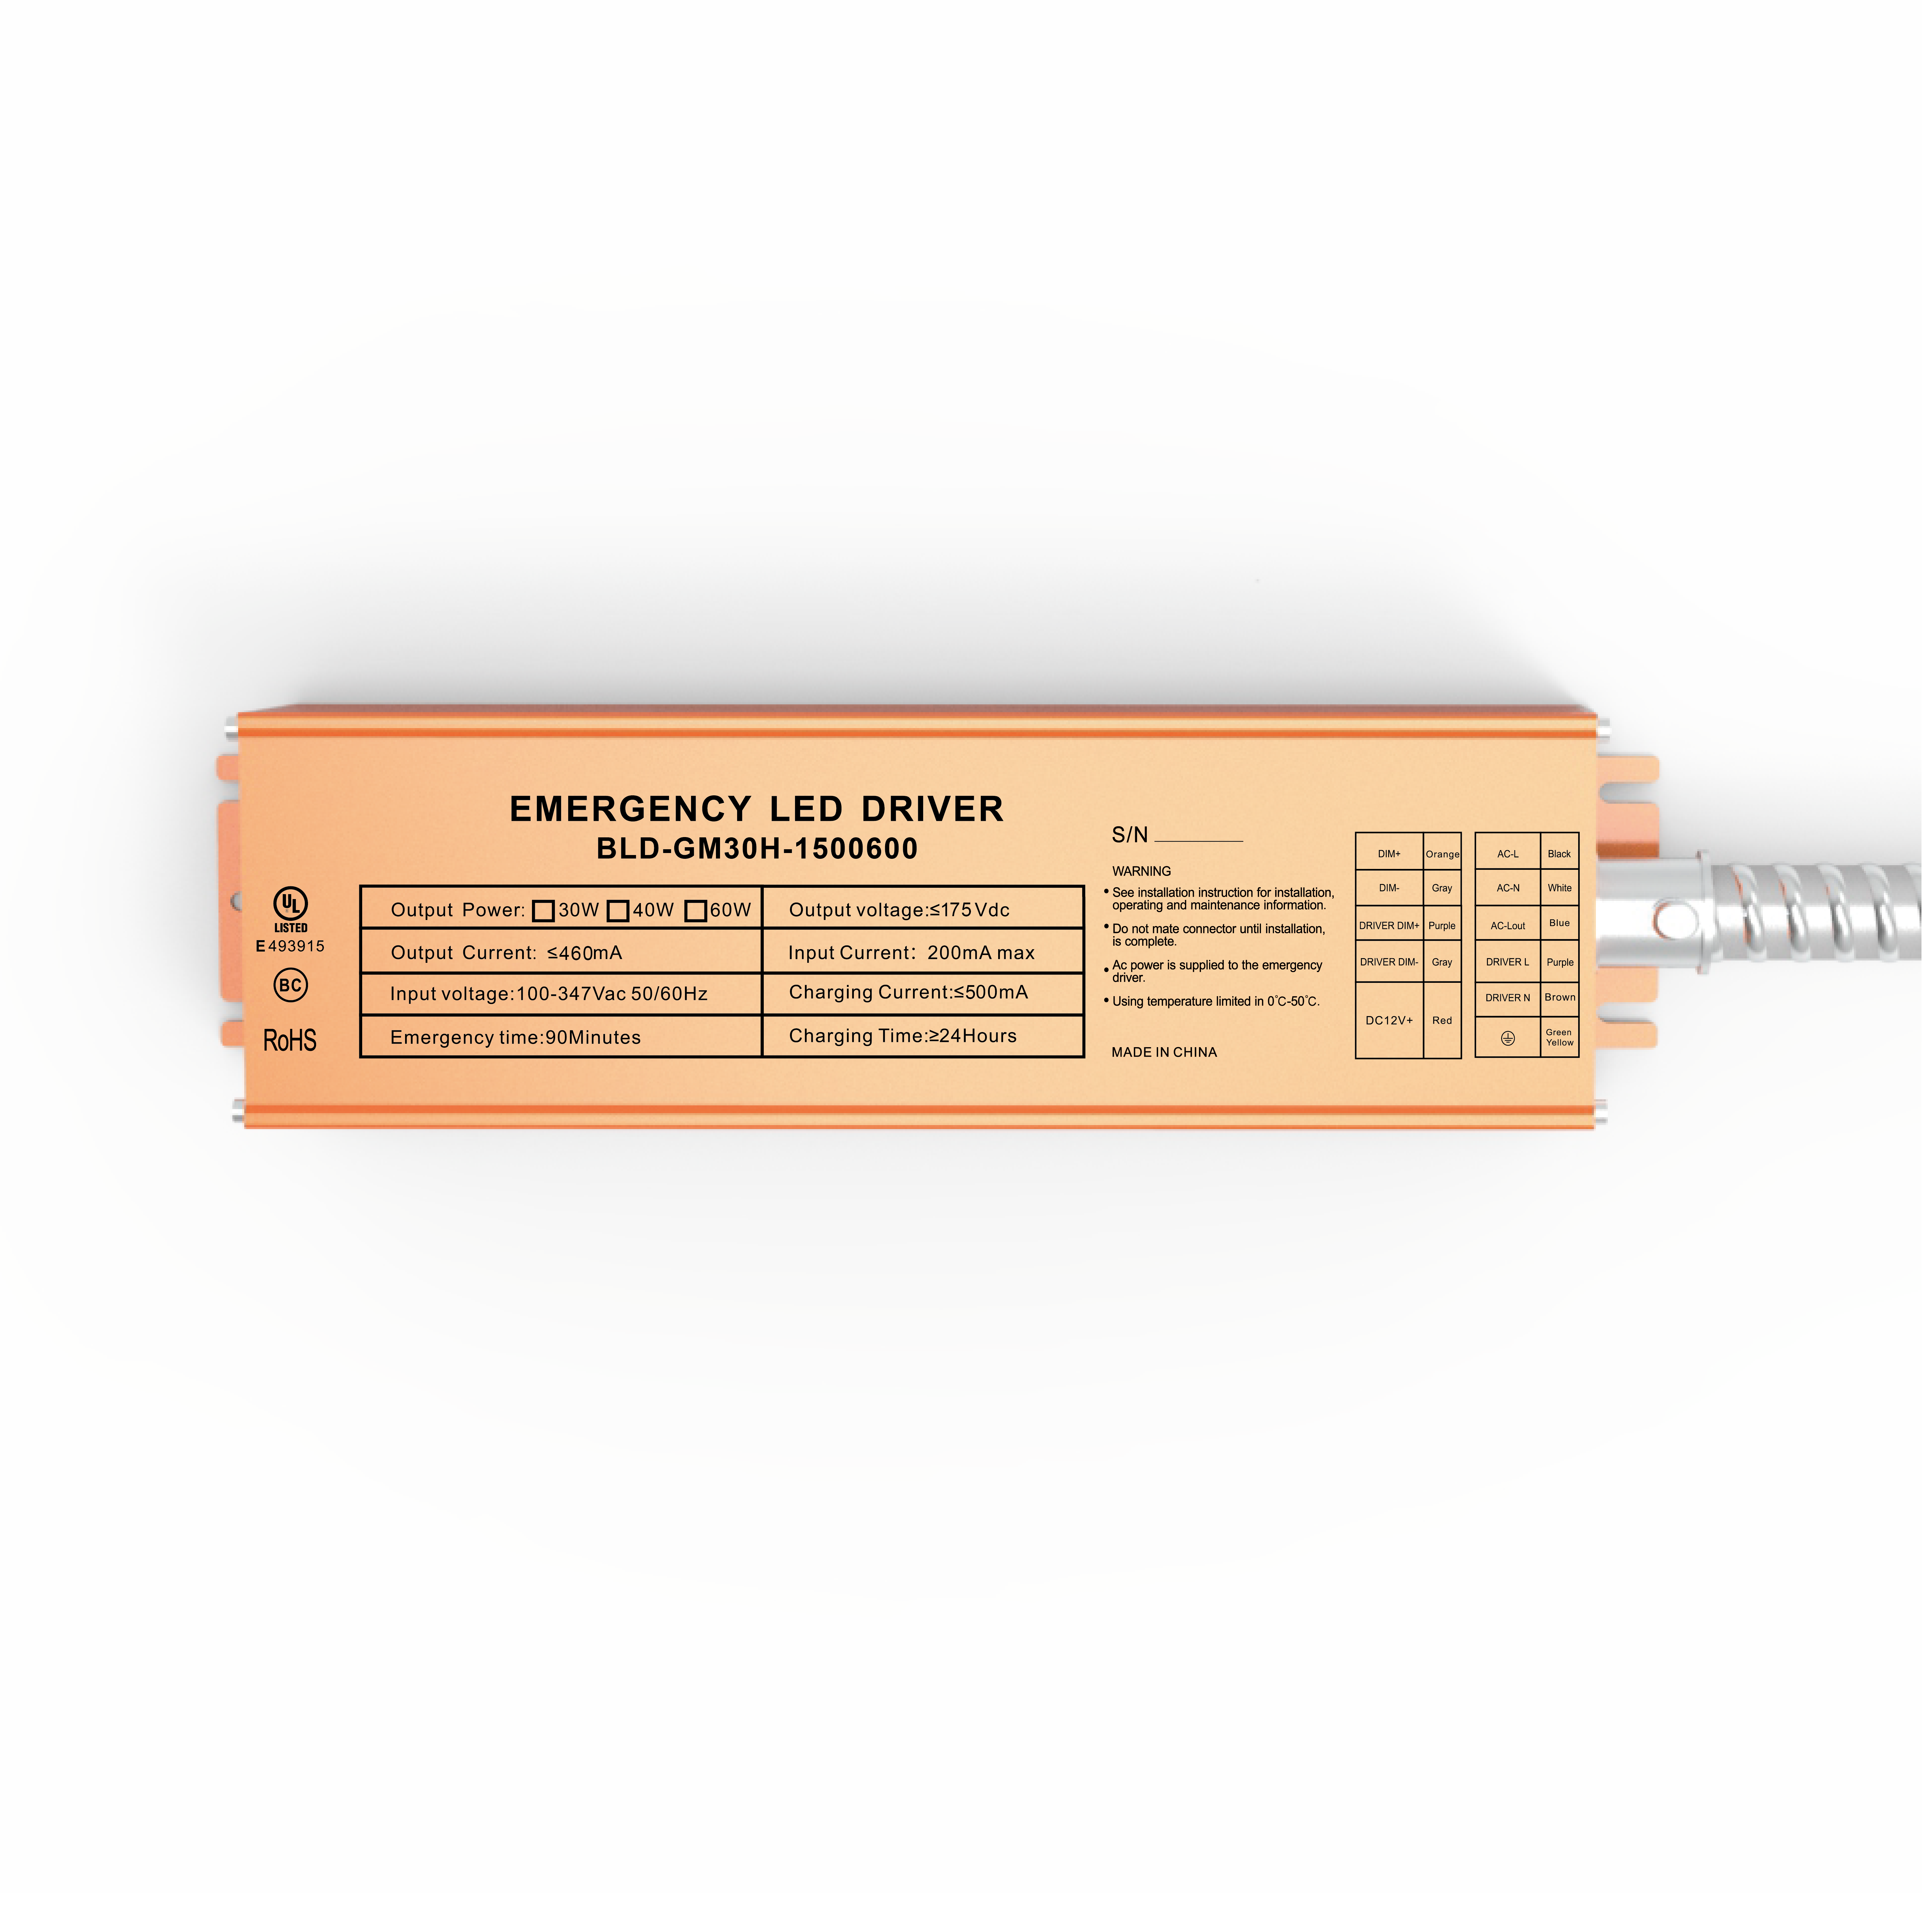 LED Emergency Drivers Supplier